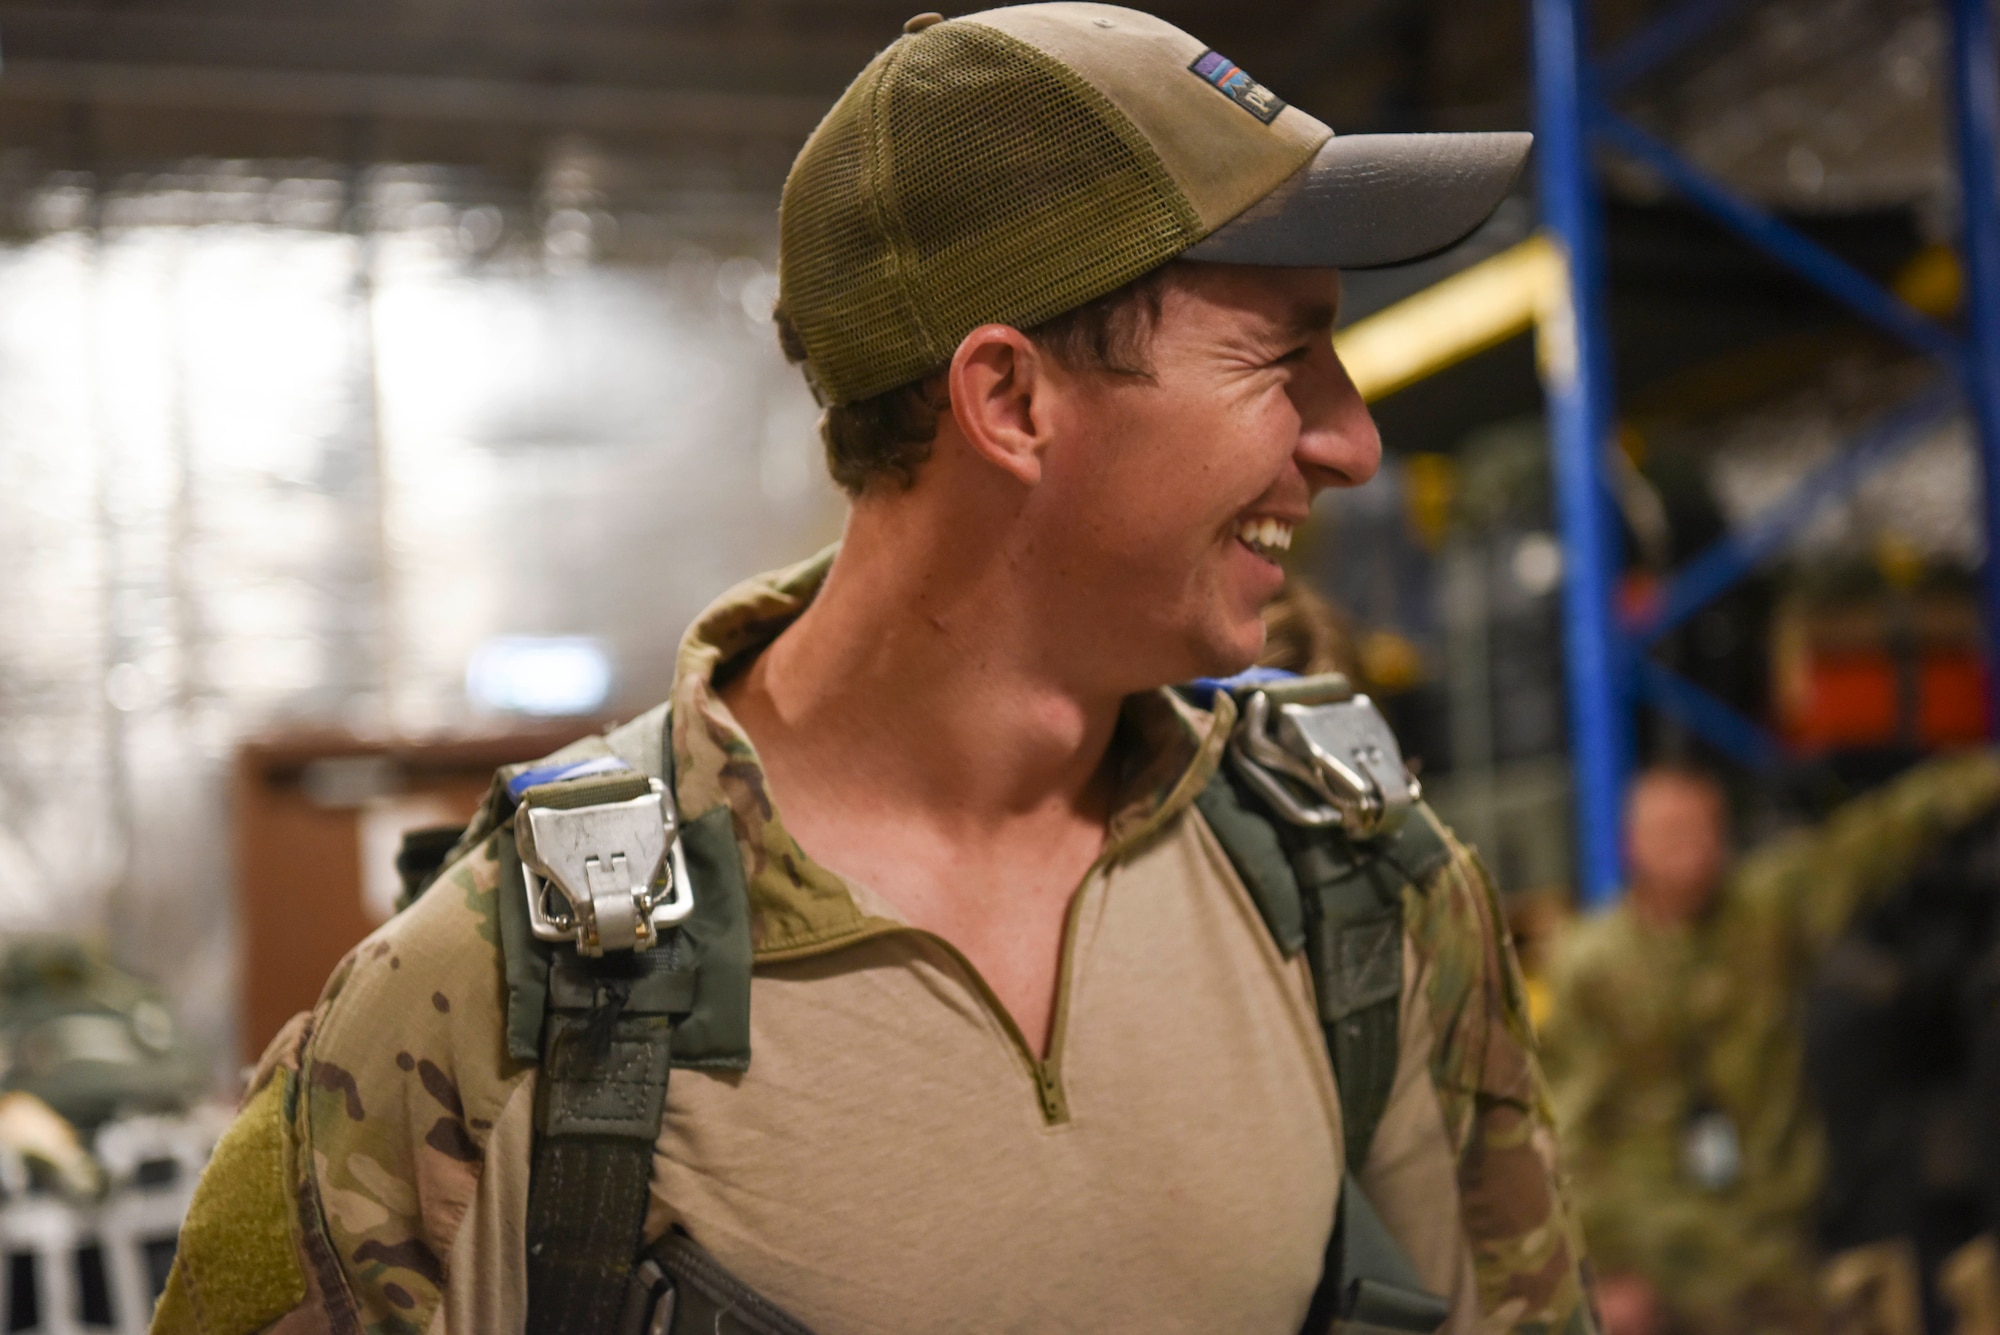 A U.S. Air Force pararescueman from the 82nd Expeditionary Rescue Squadron, waits to get his parachute rig checked at Camp Lemonnier, Djibouti, March 16, 2021.